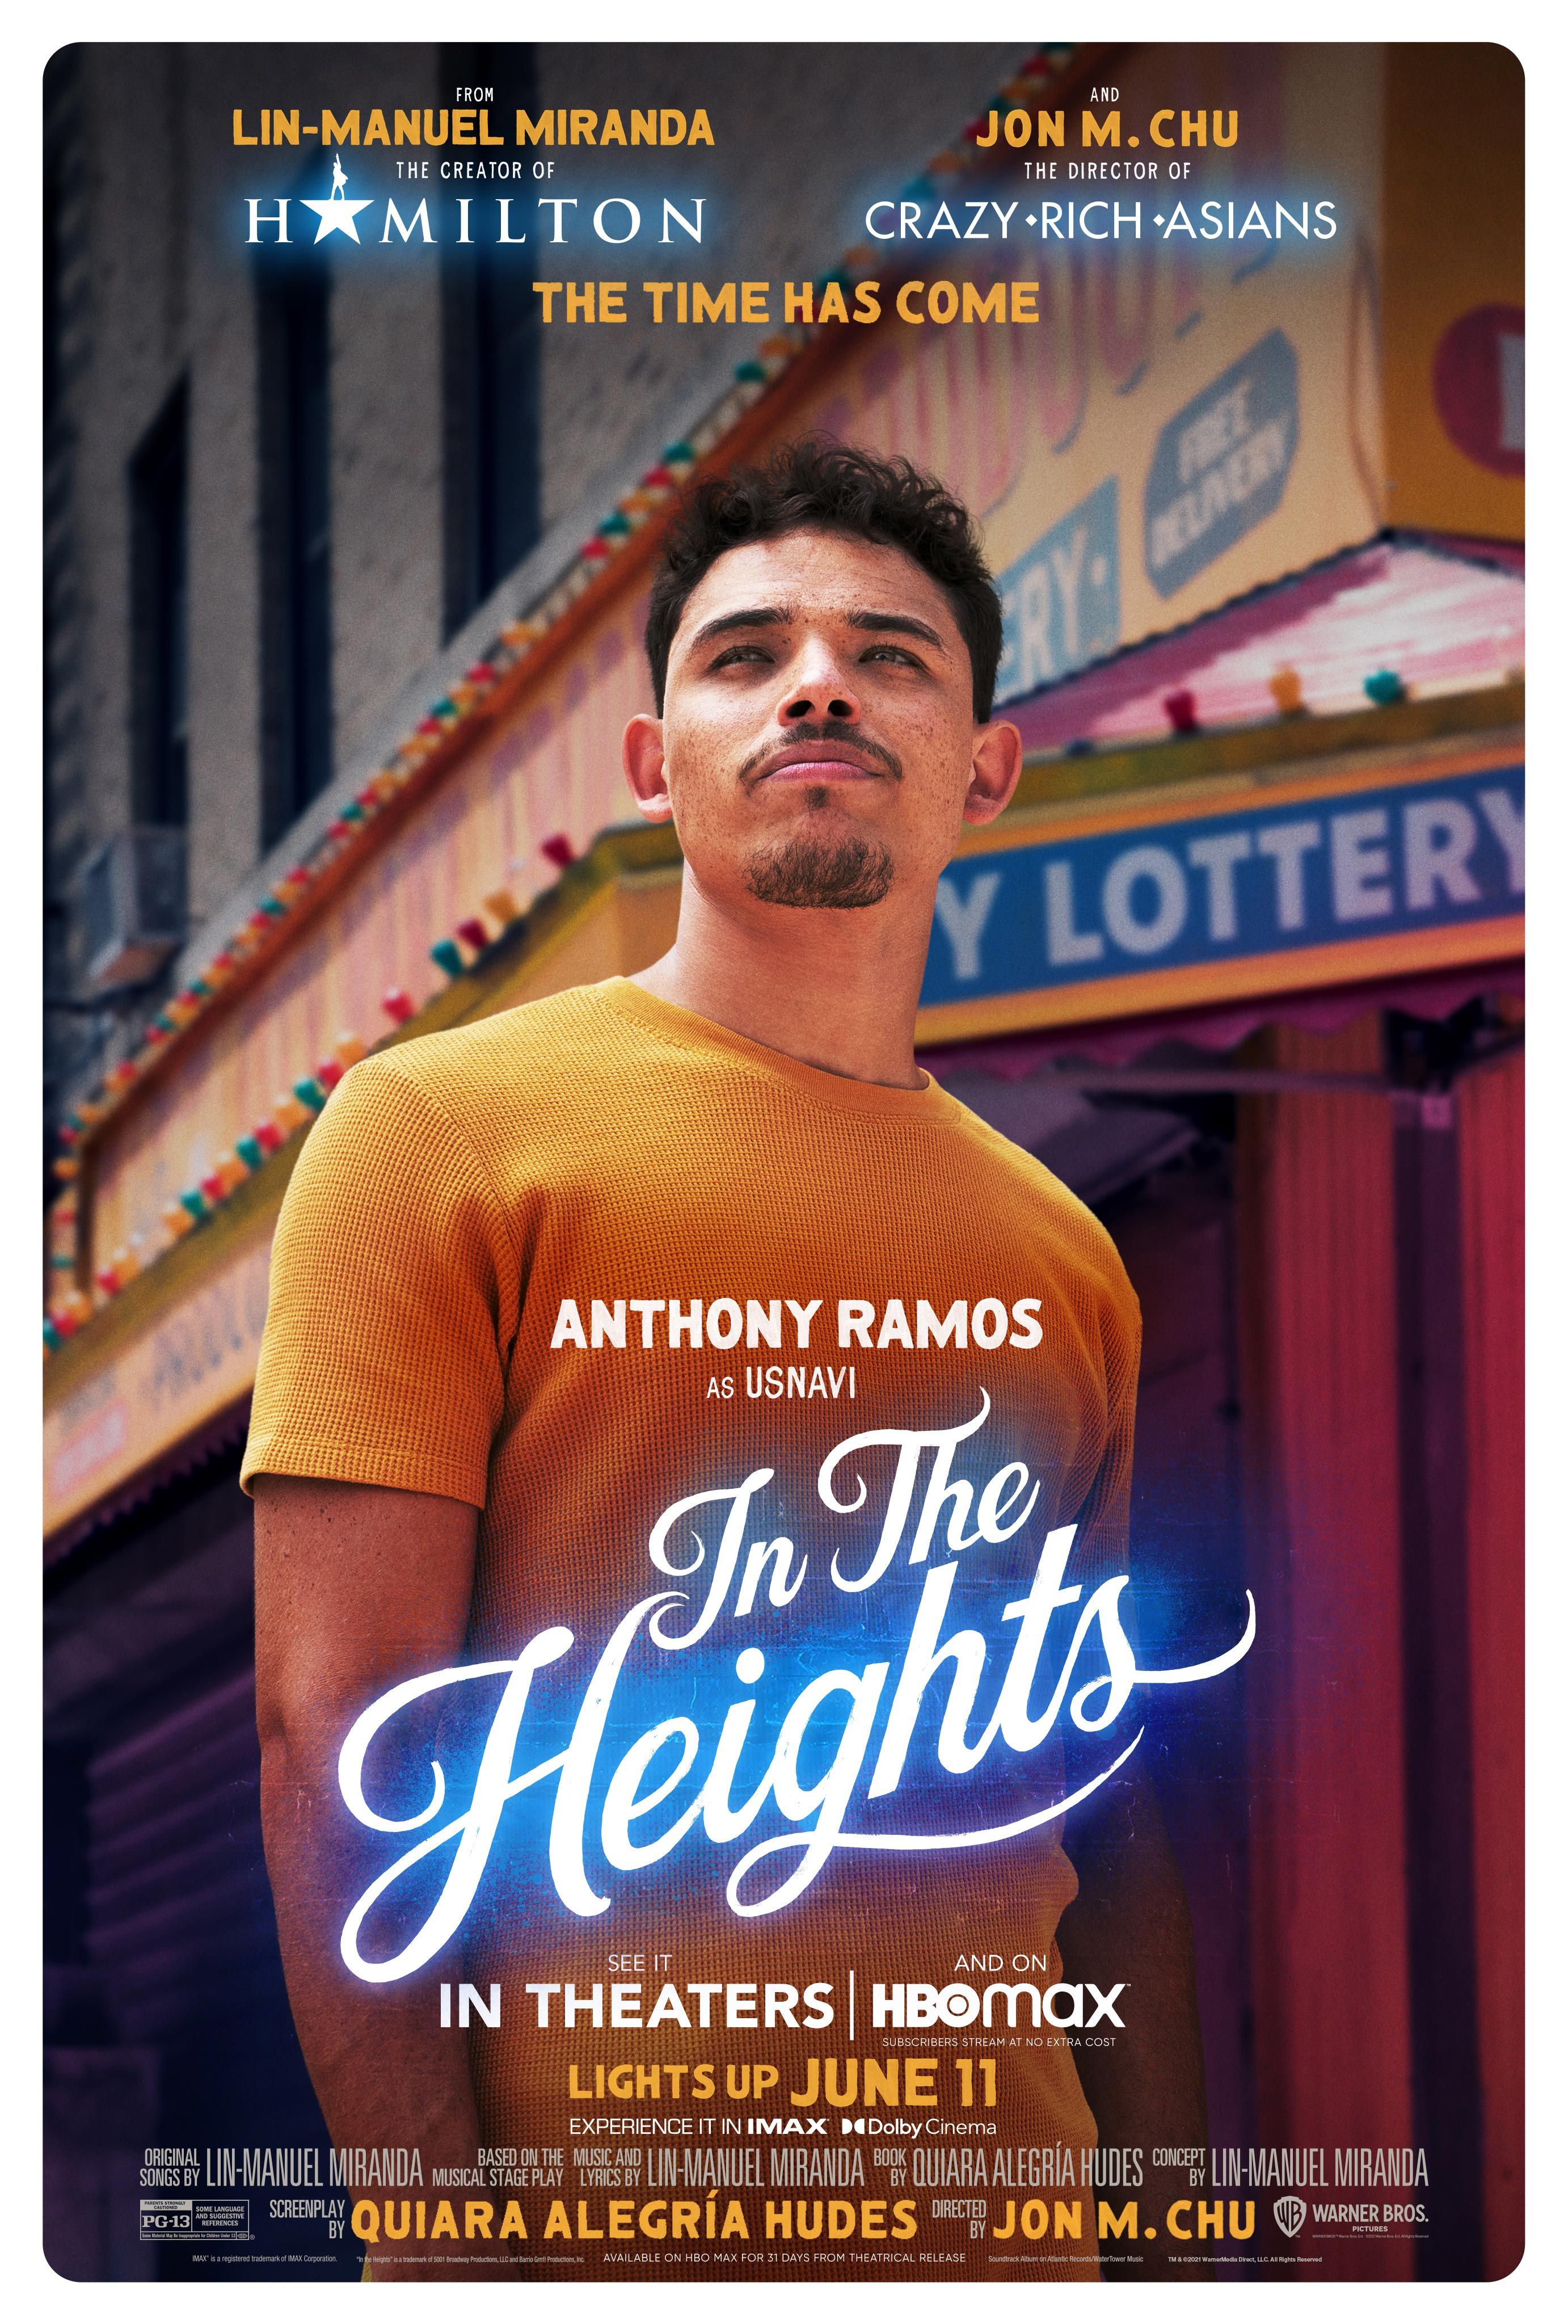 In The Heights Character Posters Give Close Ups Of Musical Cast Informone